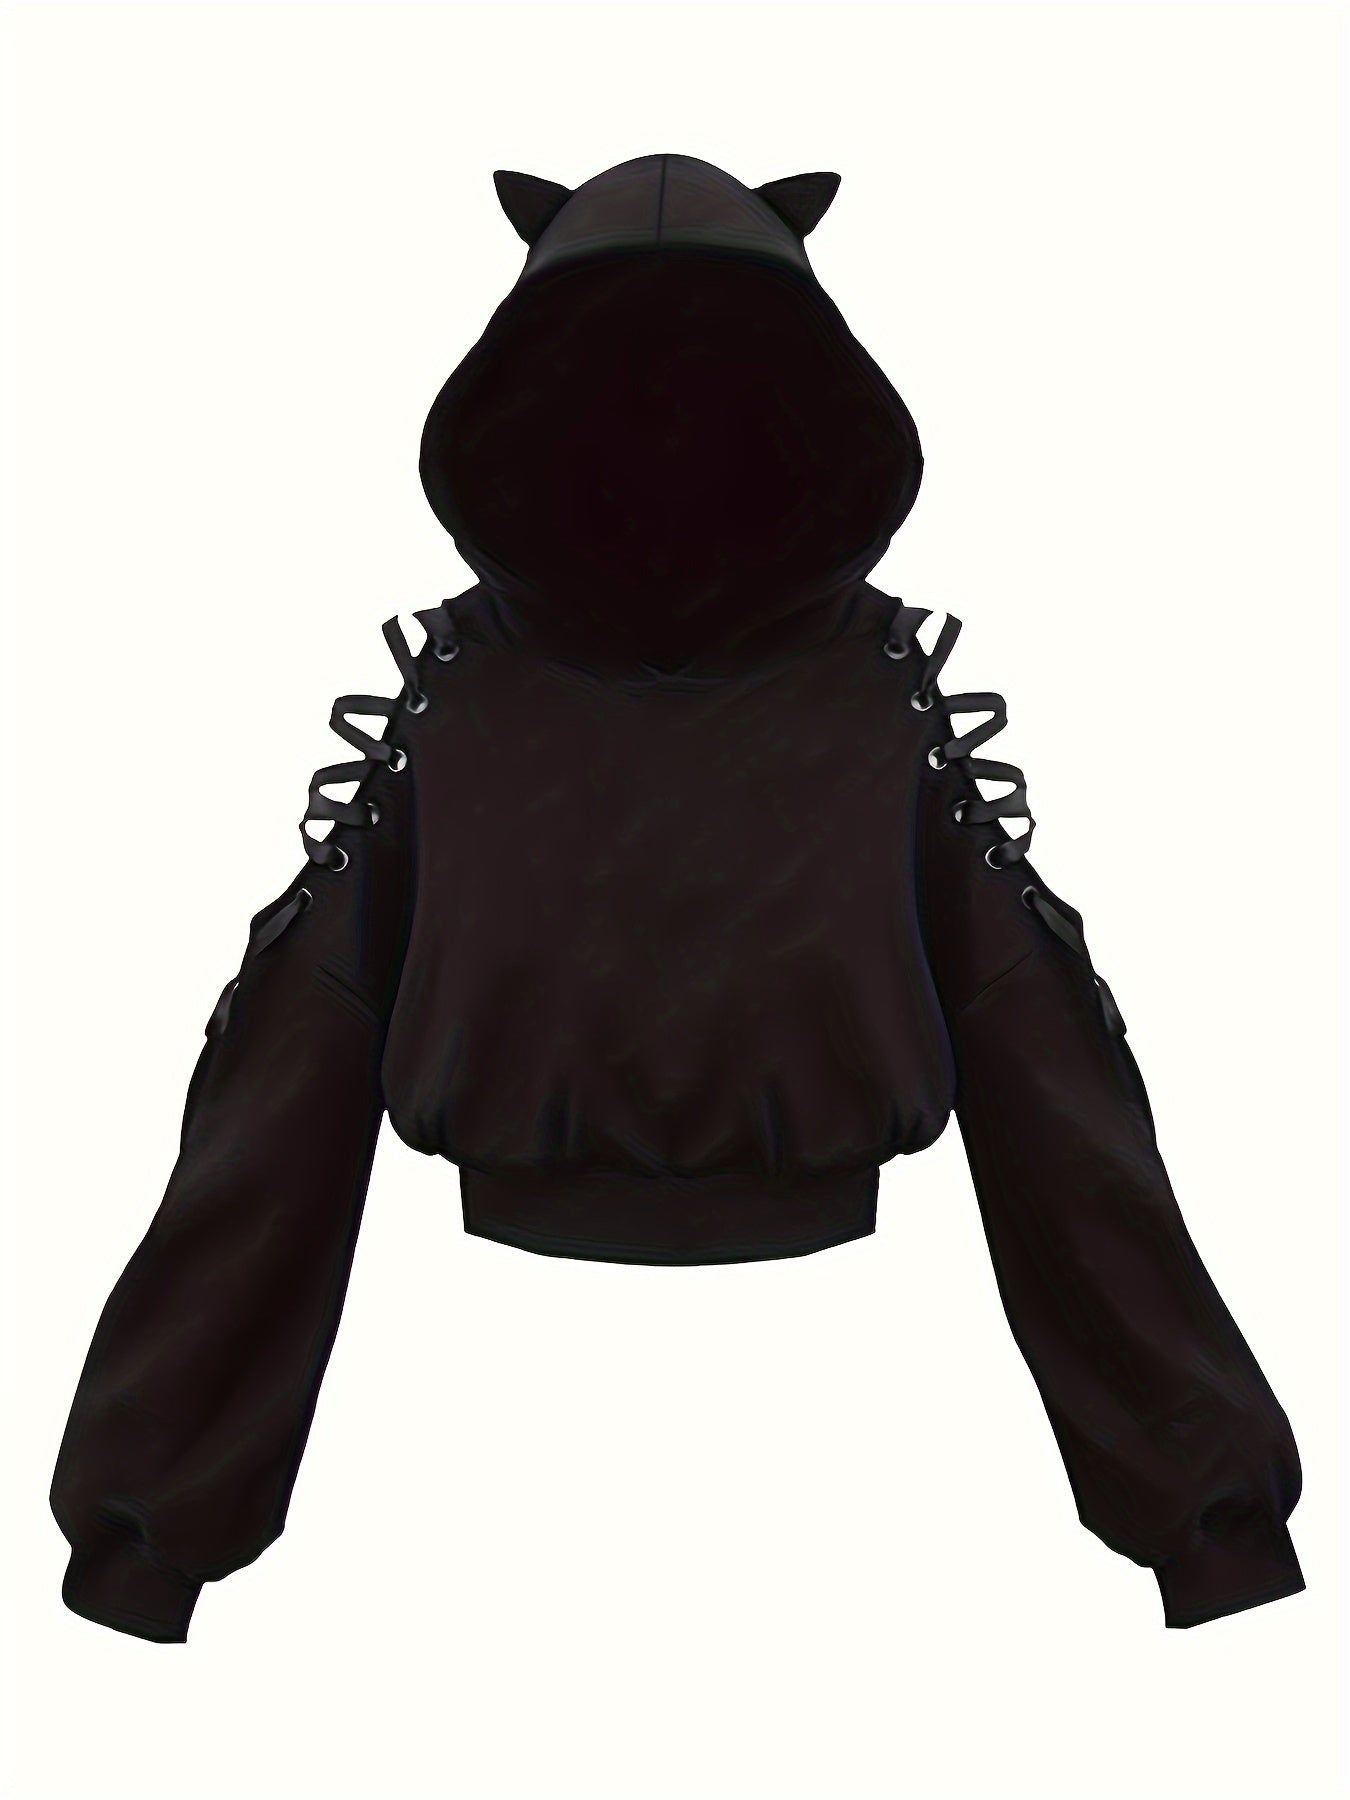 Maramalive™ Halloween Gothic Cat Ear Hoodie, Cosplay Crop Sweatshirt, Women's Clothing with cat ears on the hood and lace-up details on the sleeves, crafted from high elasticity polyester for a perfect fit. A stylish nod to the Y2K style.